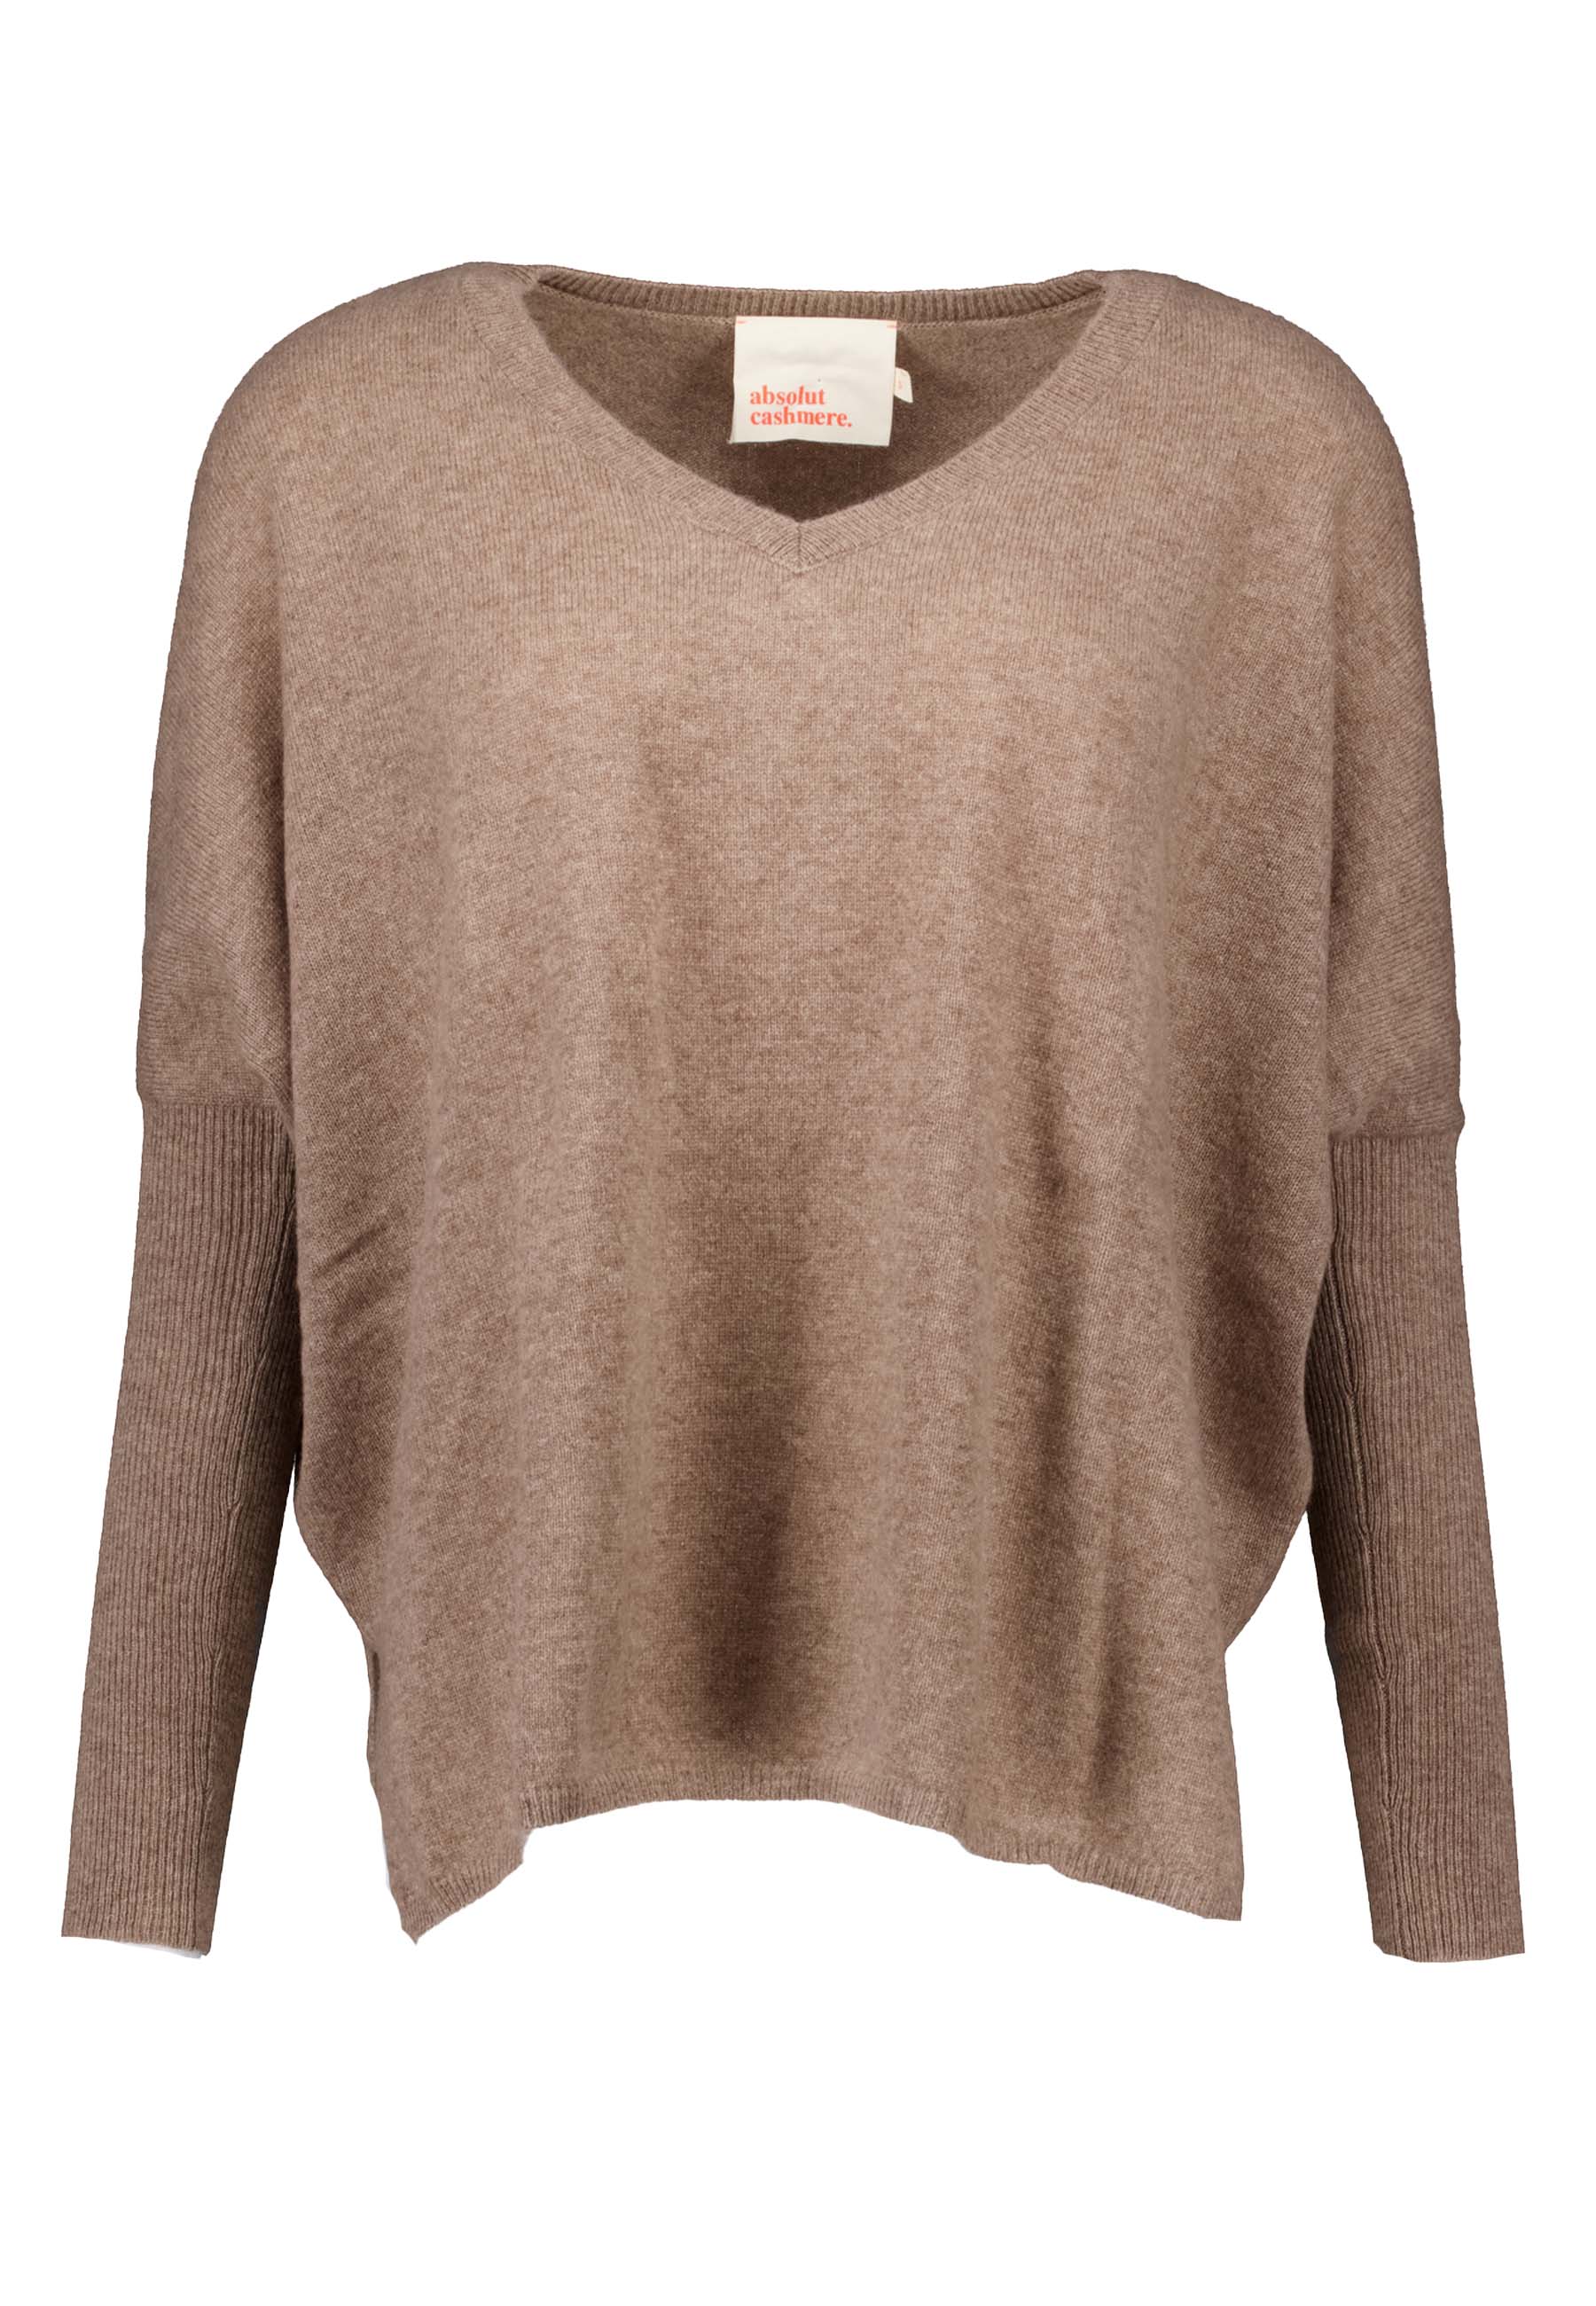 Absolut Cashmere truien taupe Dames maat S